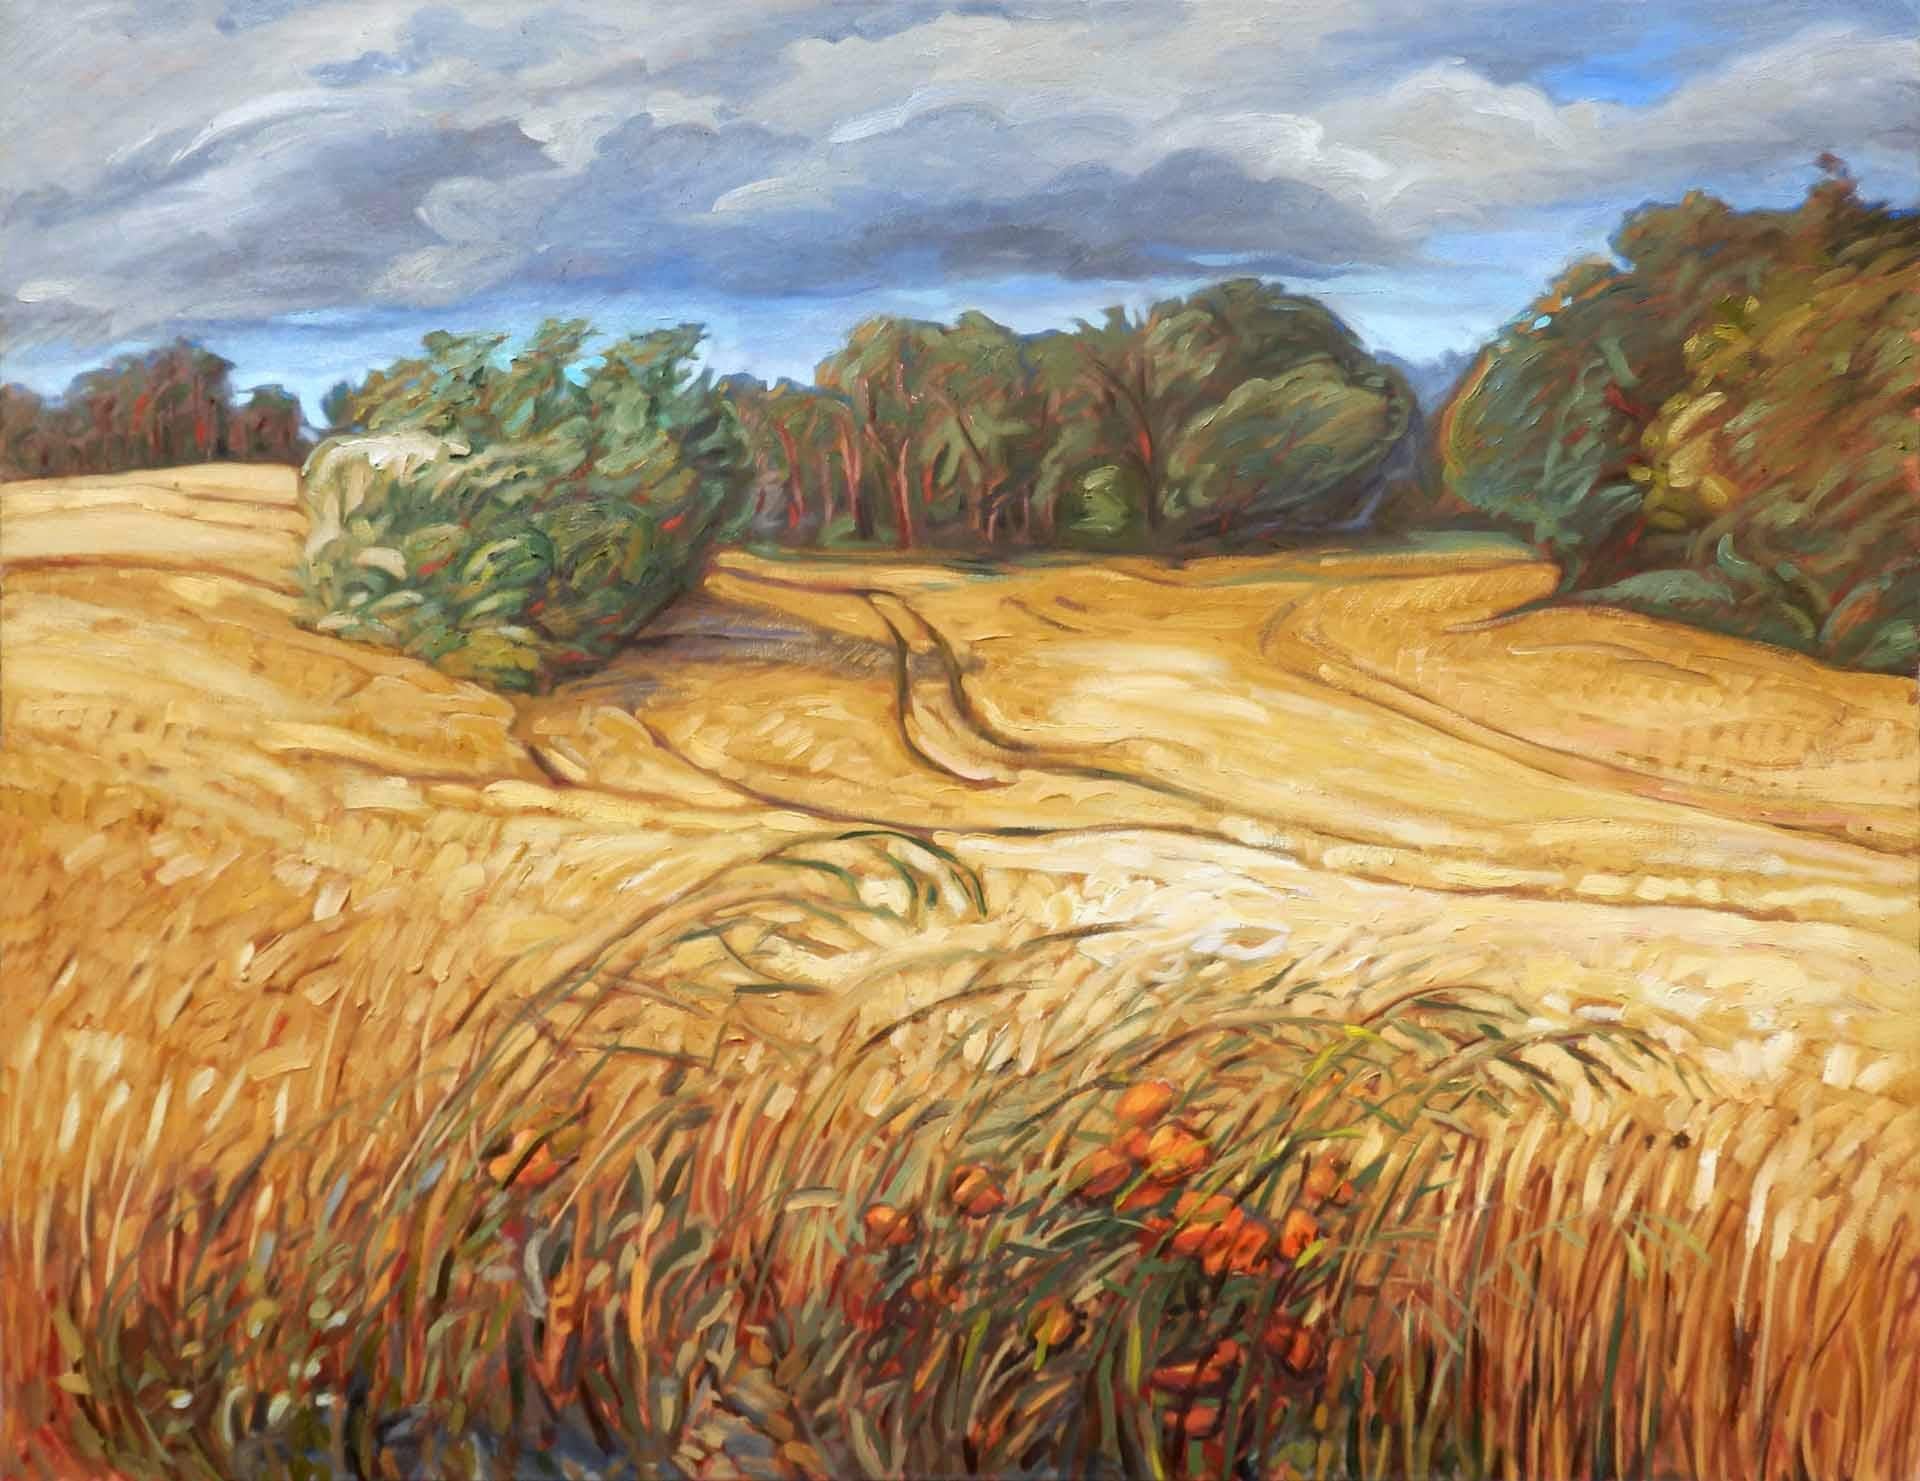 Yves Calméjane Figurative Painting - "Wheat Under the Storm", Captivating Stormy Landscape of pre-Harvest Fields